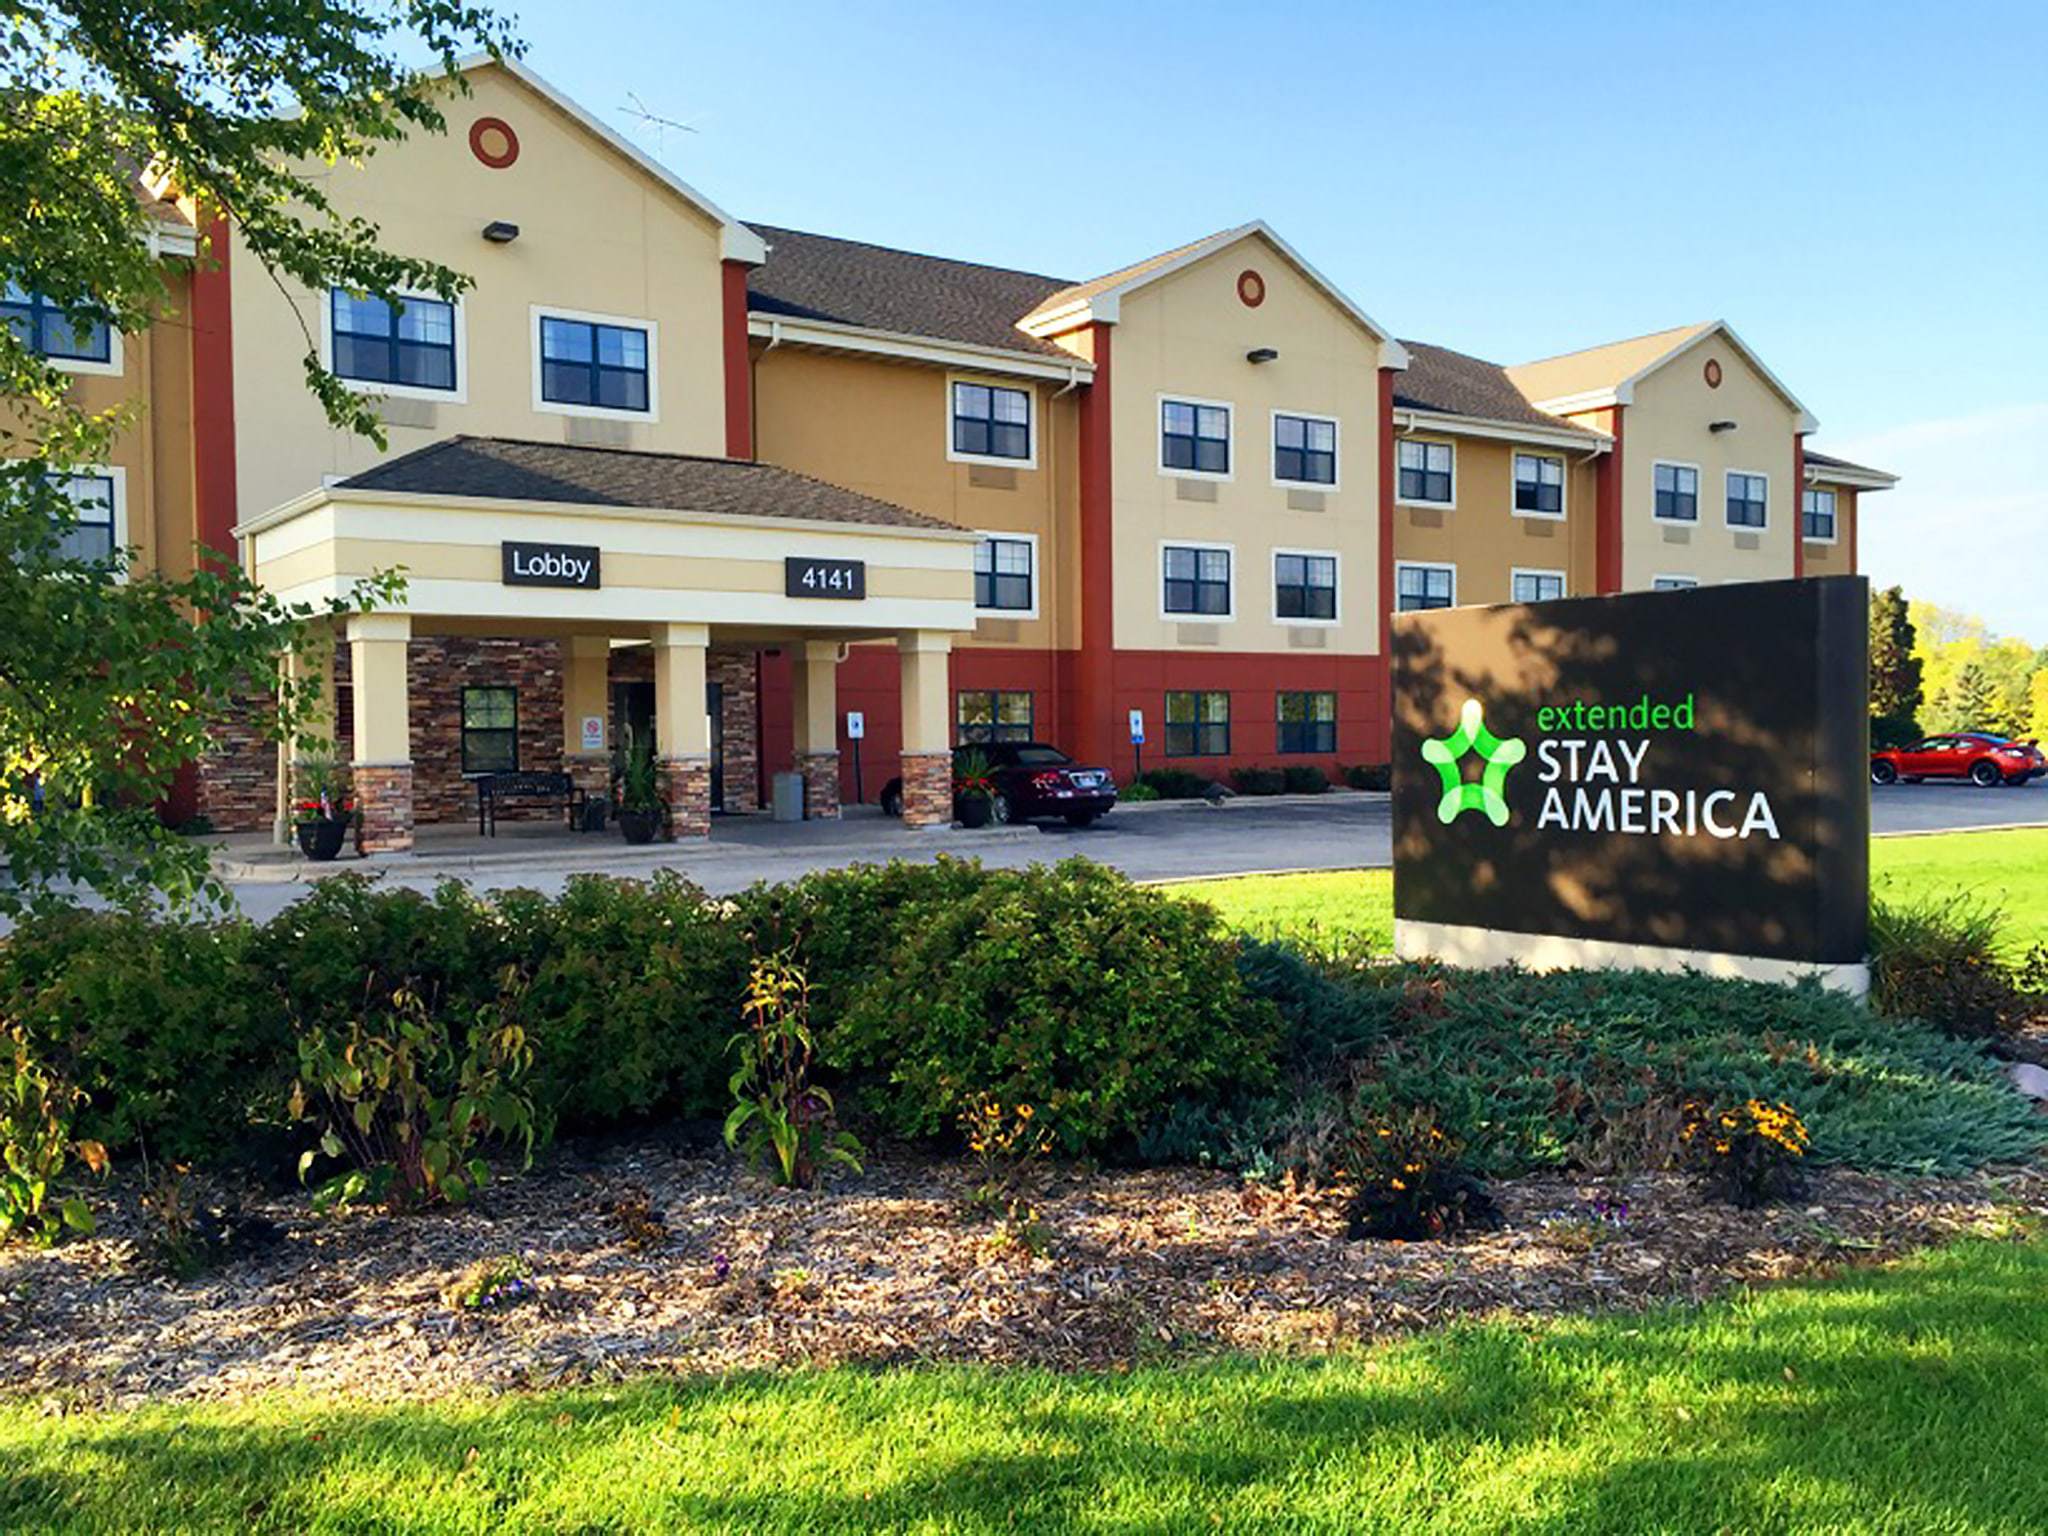 Photo of Extended Stay America - Appleton - Fox Cities, Appleton, WI